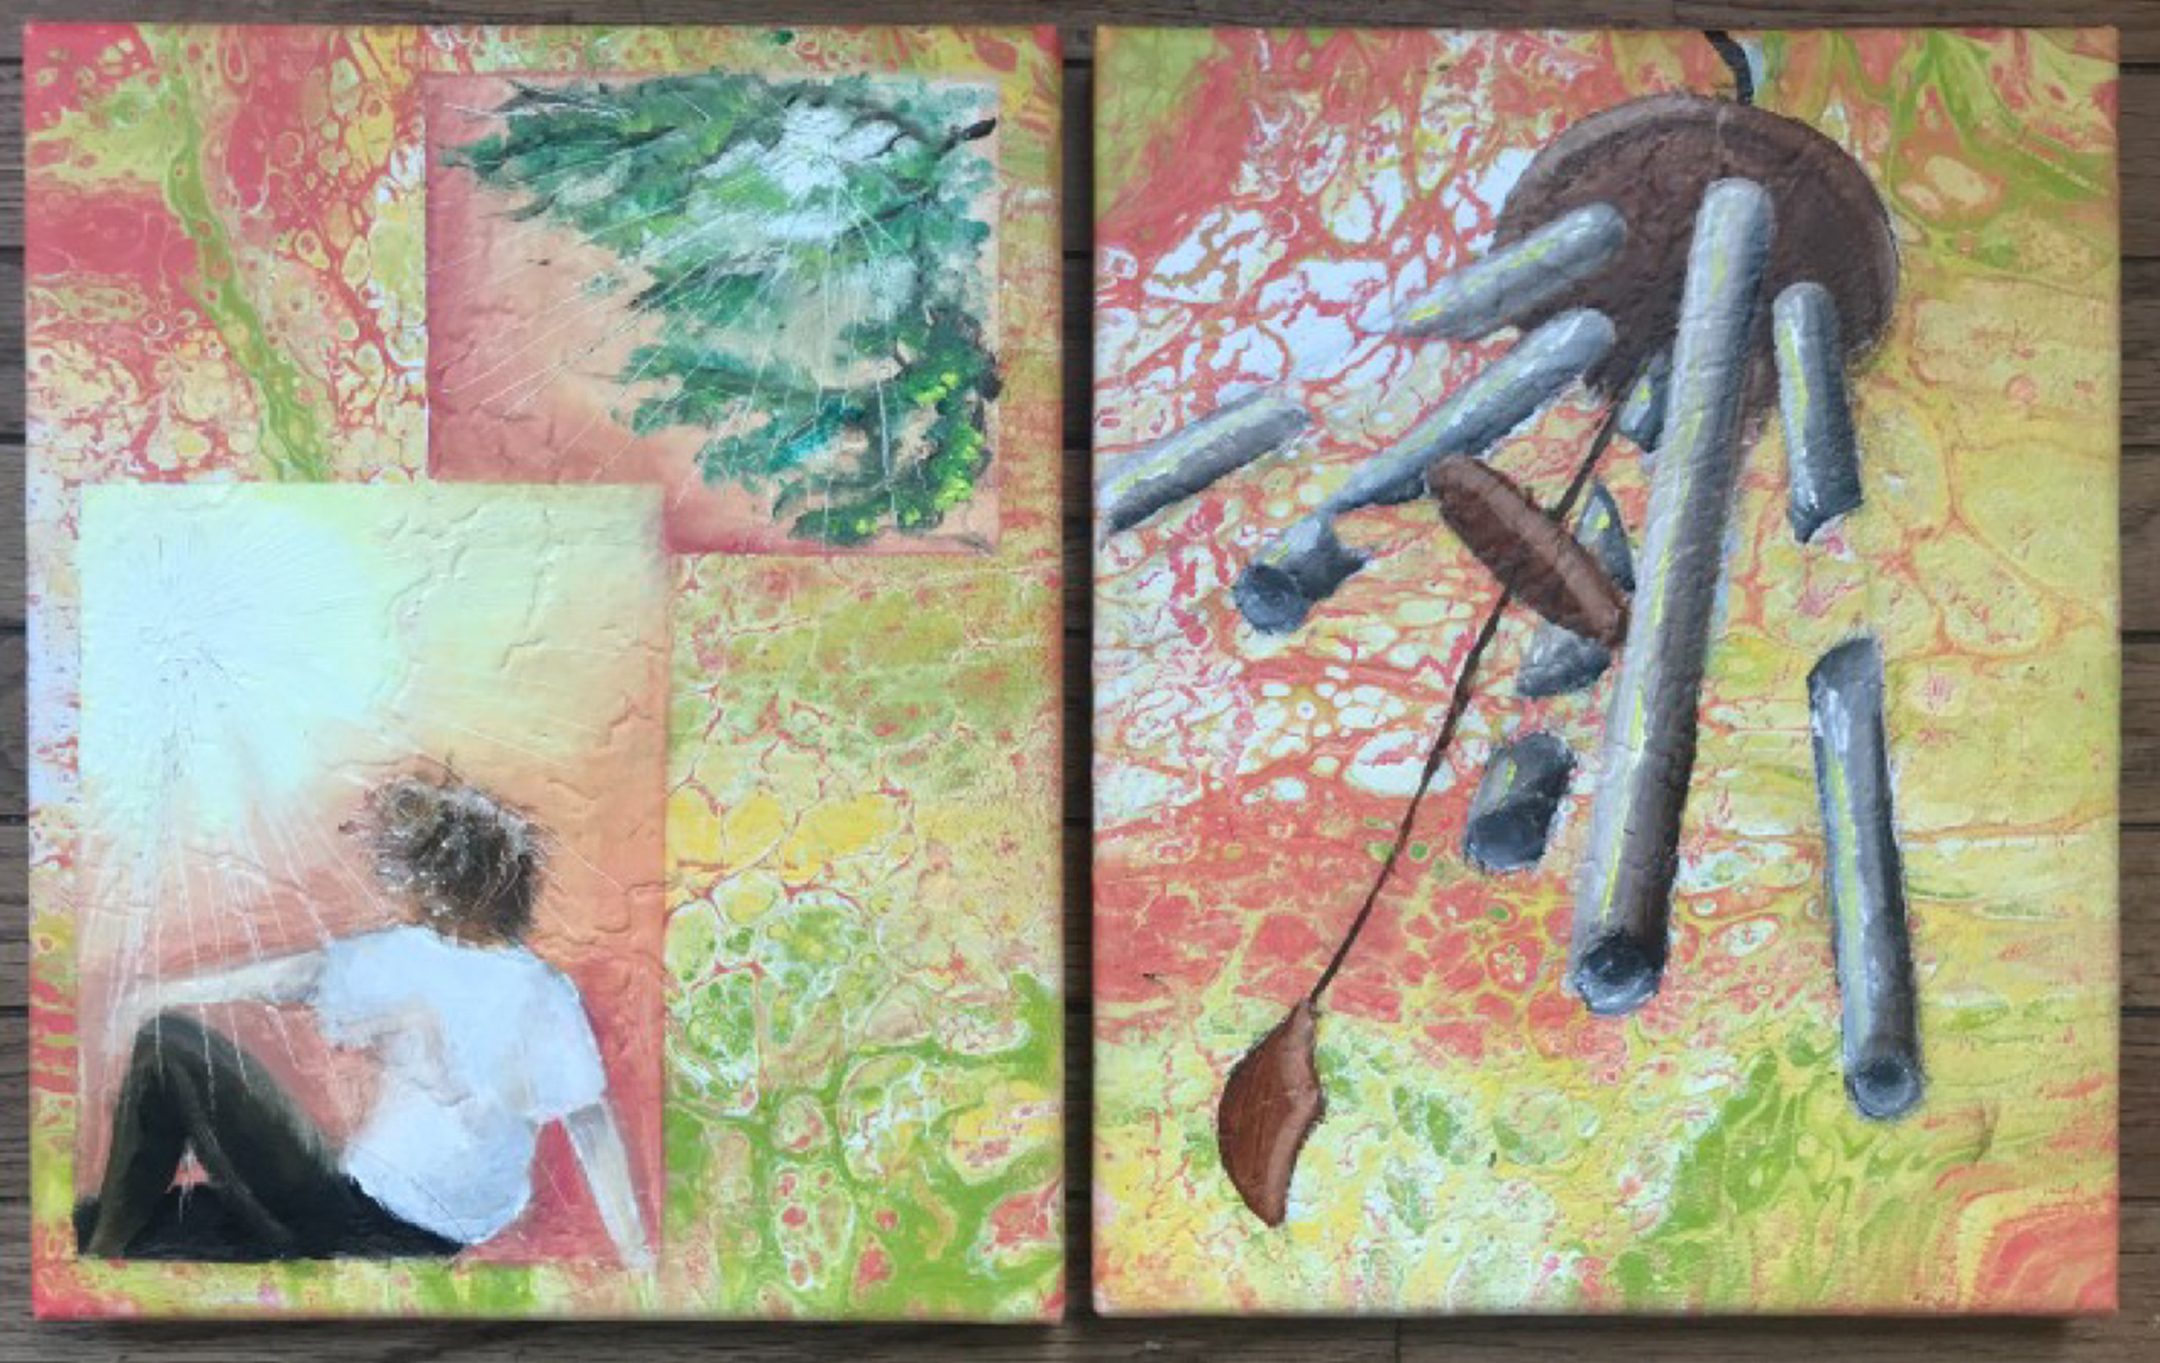 Two paintings, side by side, with one of a seated young person in a forest-like scene on the left and a broken wind chime on the right